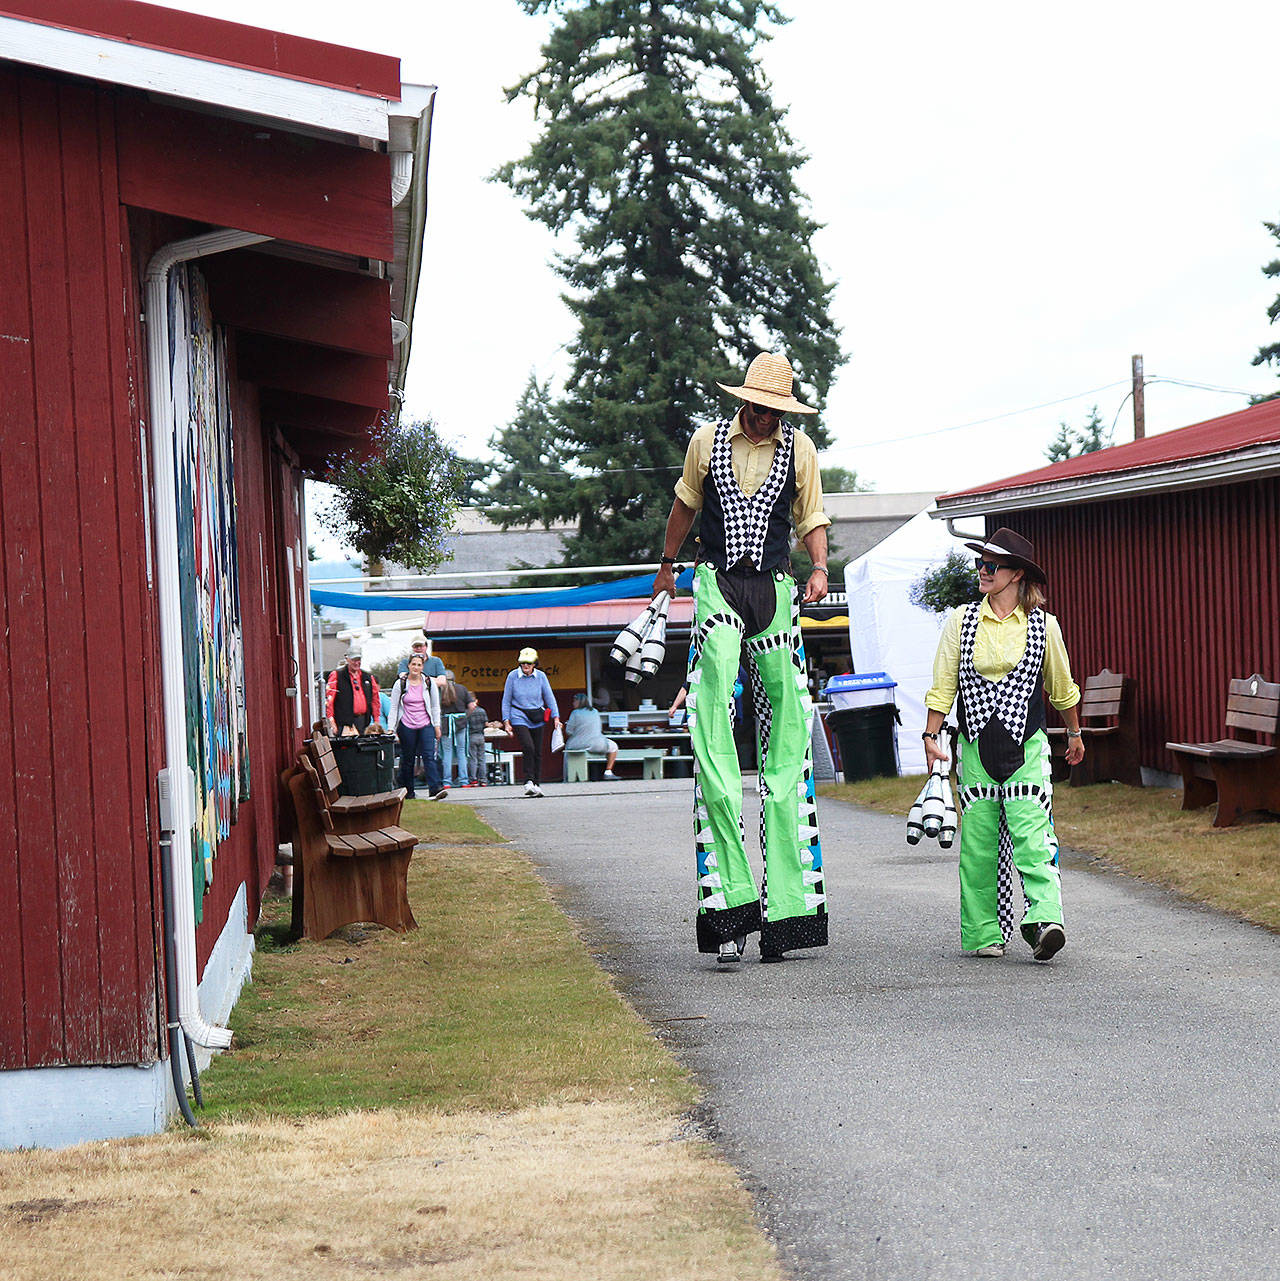 Juggling duo Wren Schultz, left, and Della Moustachella take a stroll Thursday at the Whidbey Island Fair. Photos by Laura Guido/Whidbey News Group